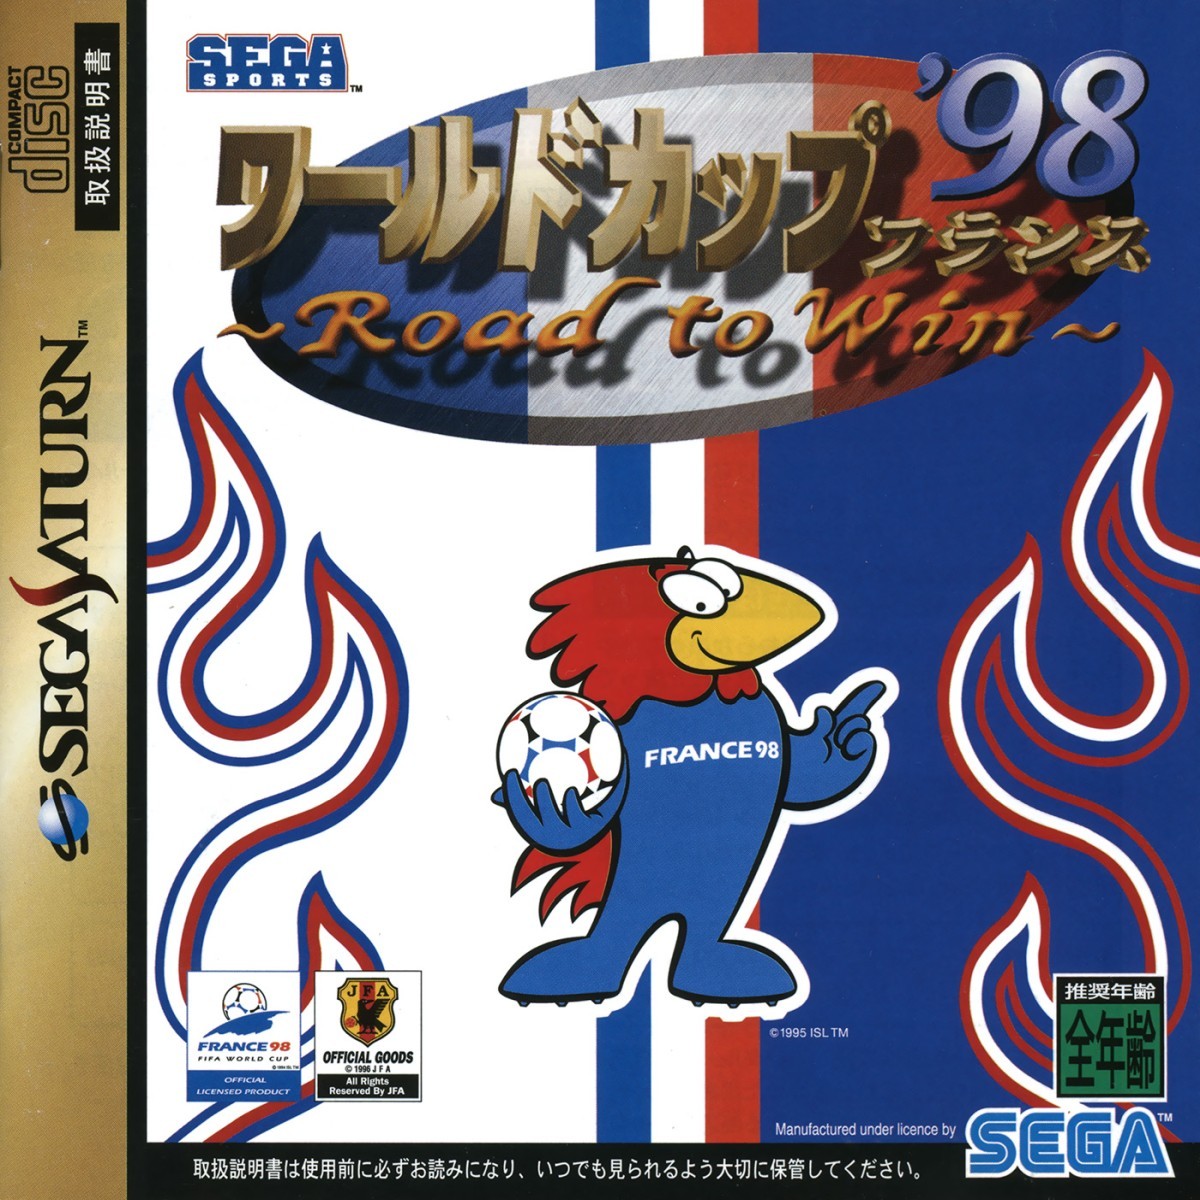 World Cup 98 France: Road to Win cover